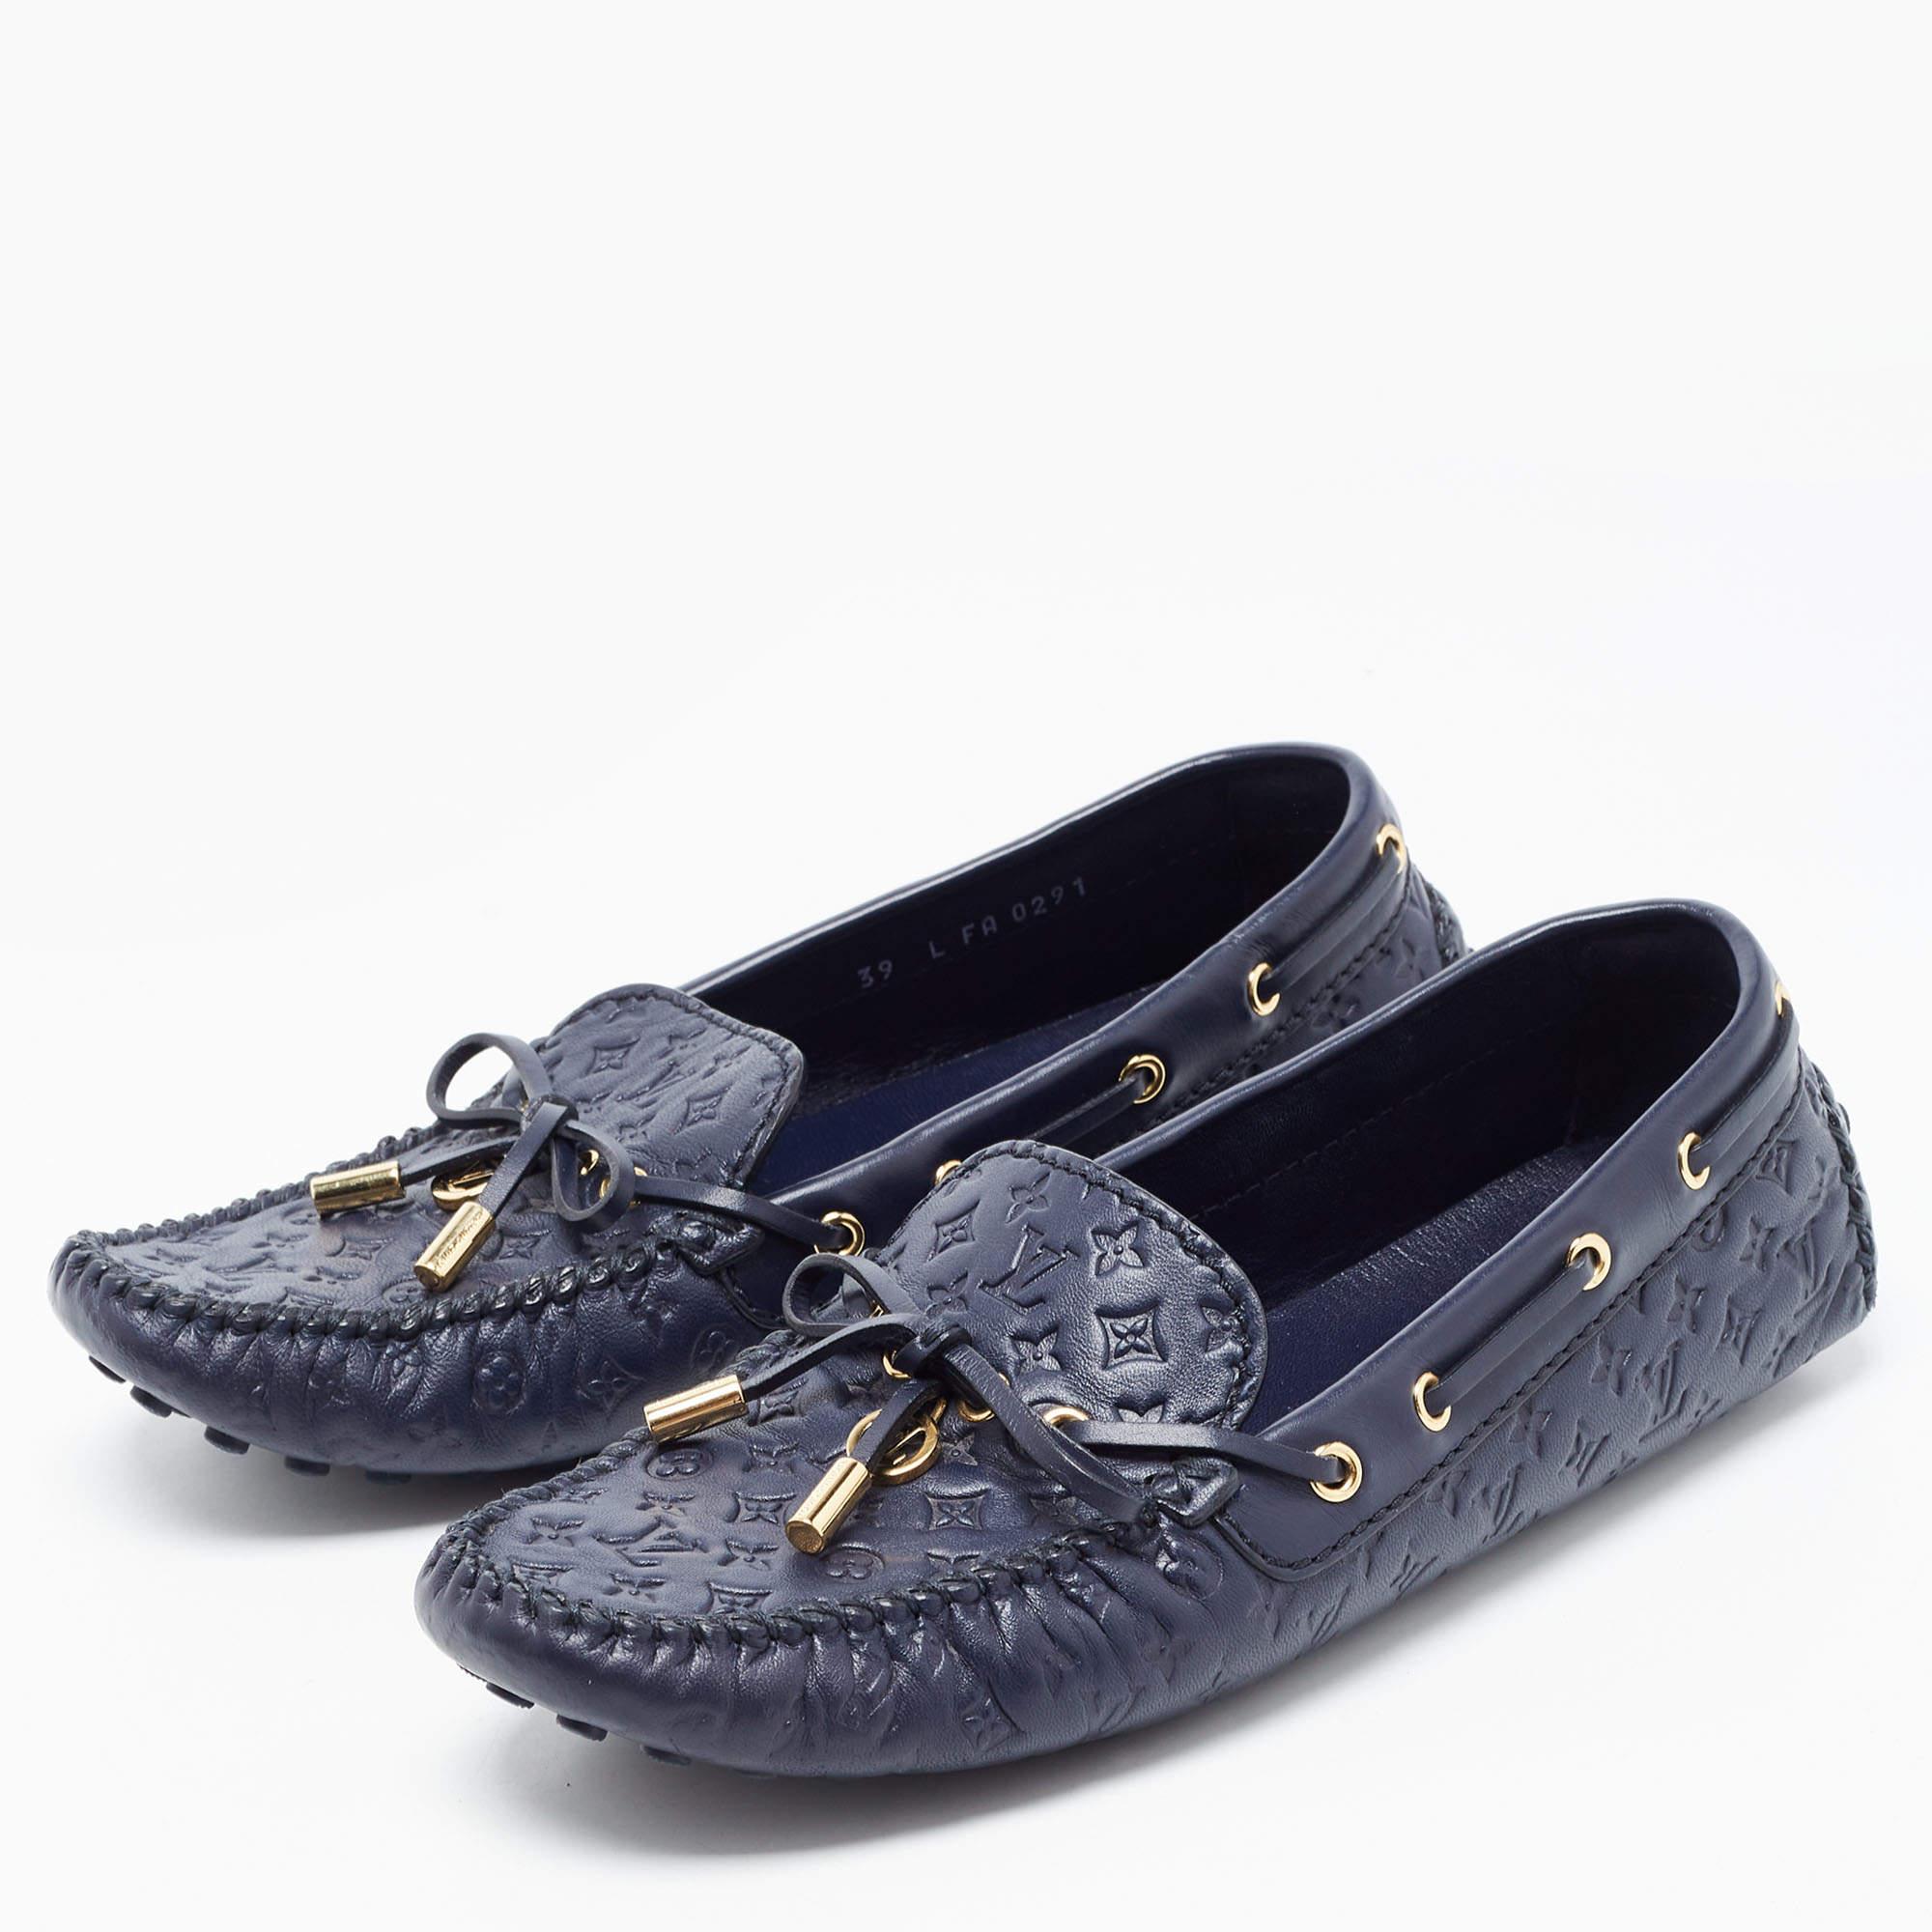 Louis Vuitton Navy Blue Leather Gloria Bow Slip On Loafers Size 39 5